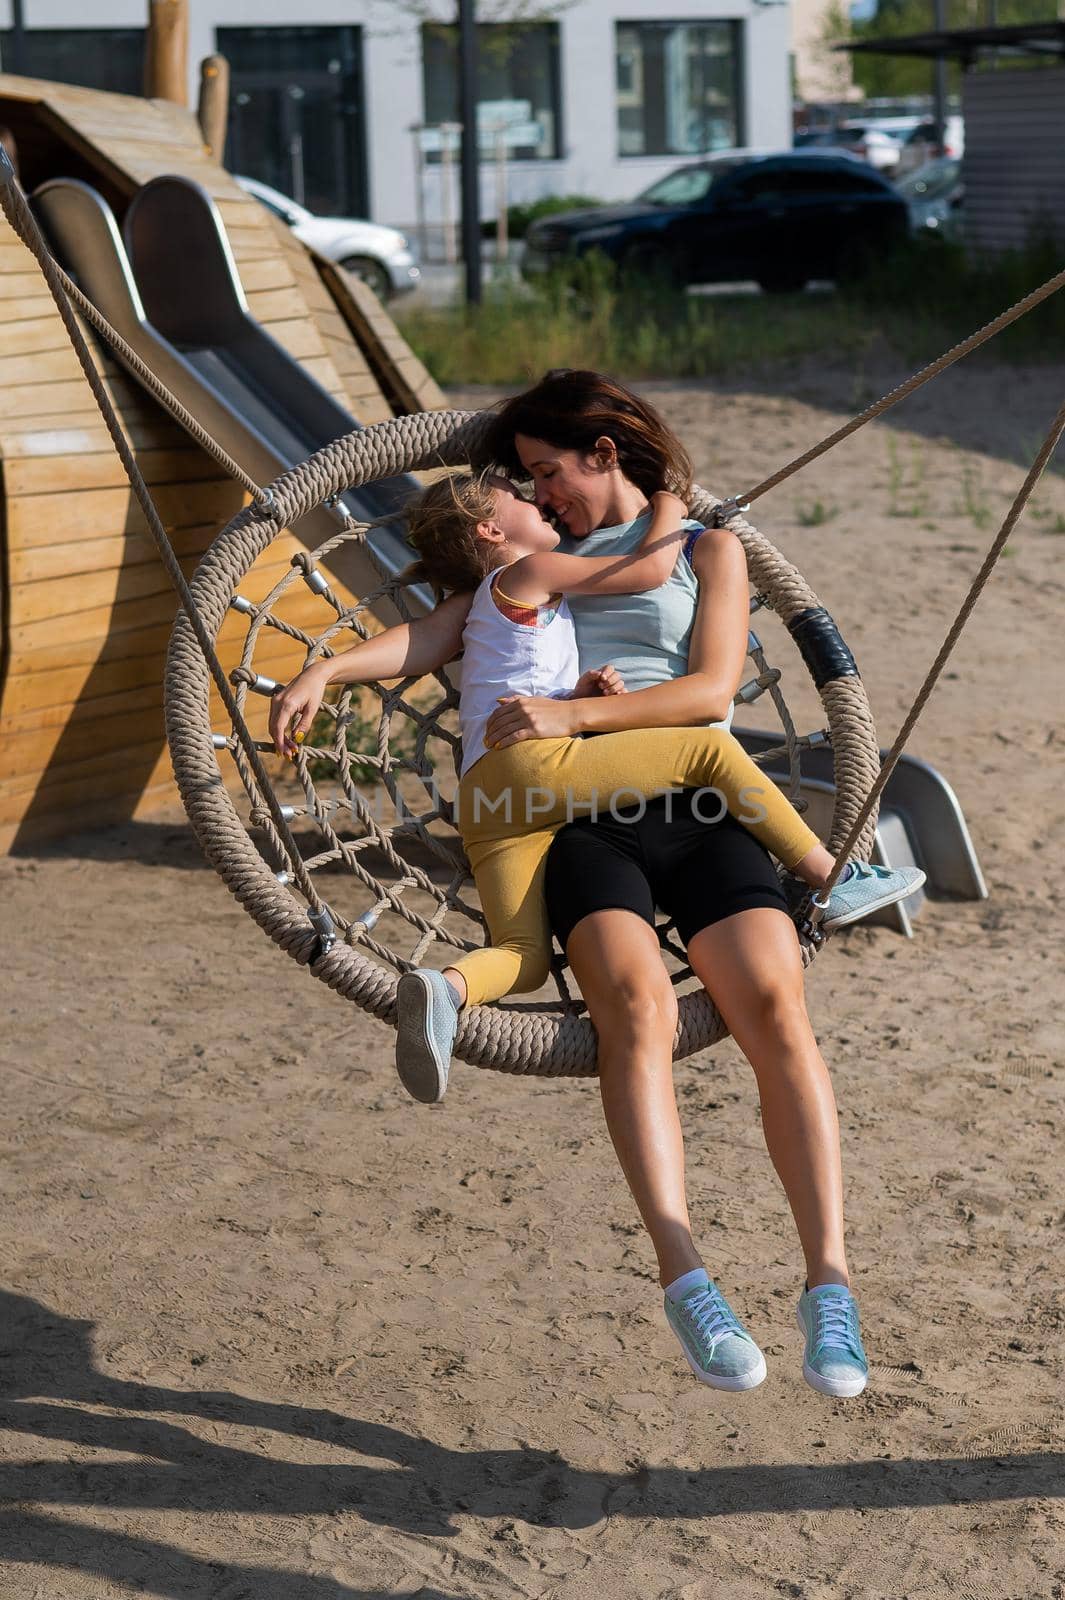 Mom and daughter swing on a round swing. Caucasian woman and little girl have fun on the playground